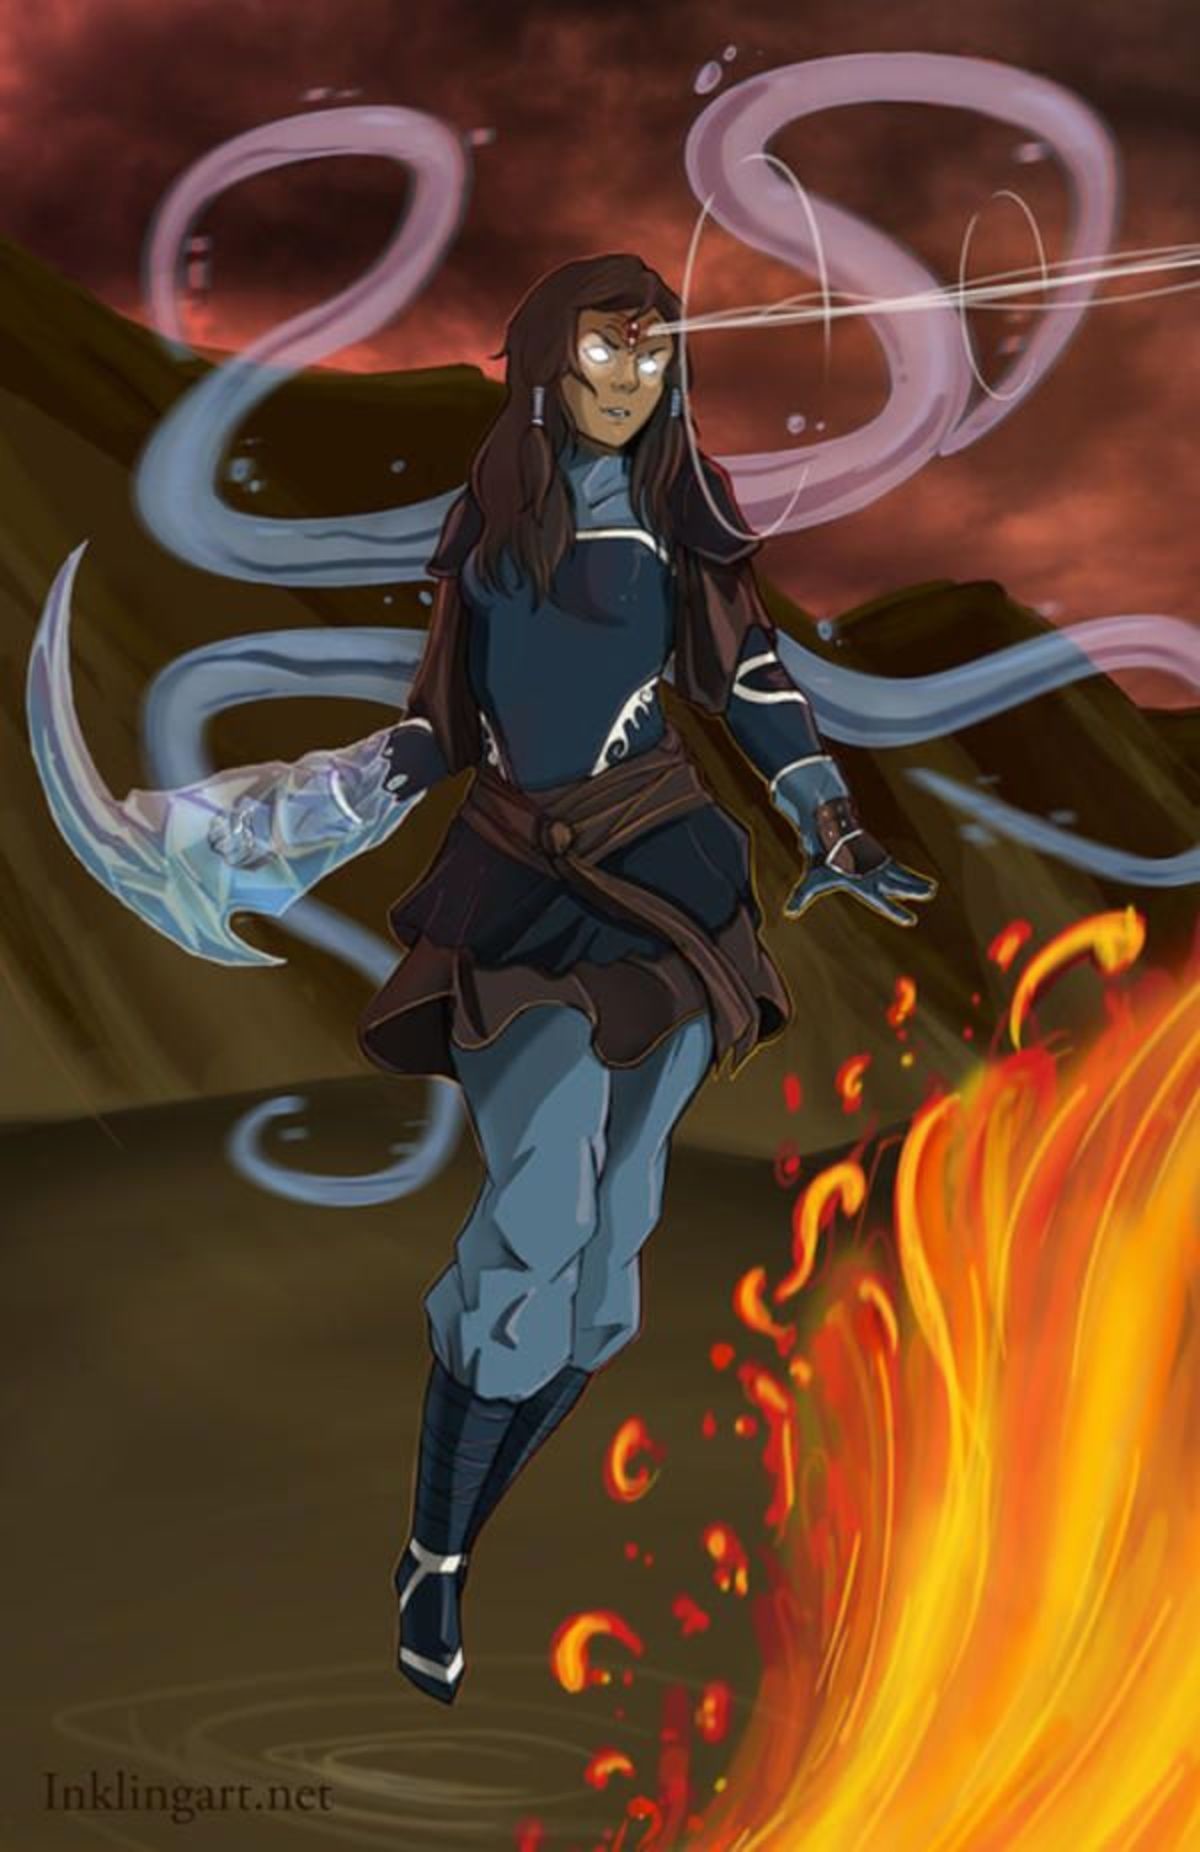 Red Lotus Korra. .. Cool idea, but an Avatar can never learn to fly.